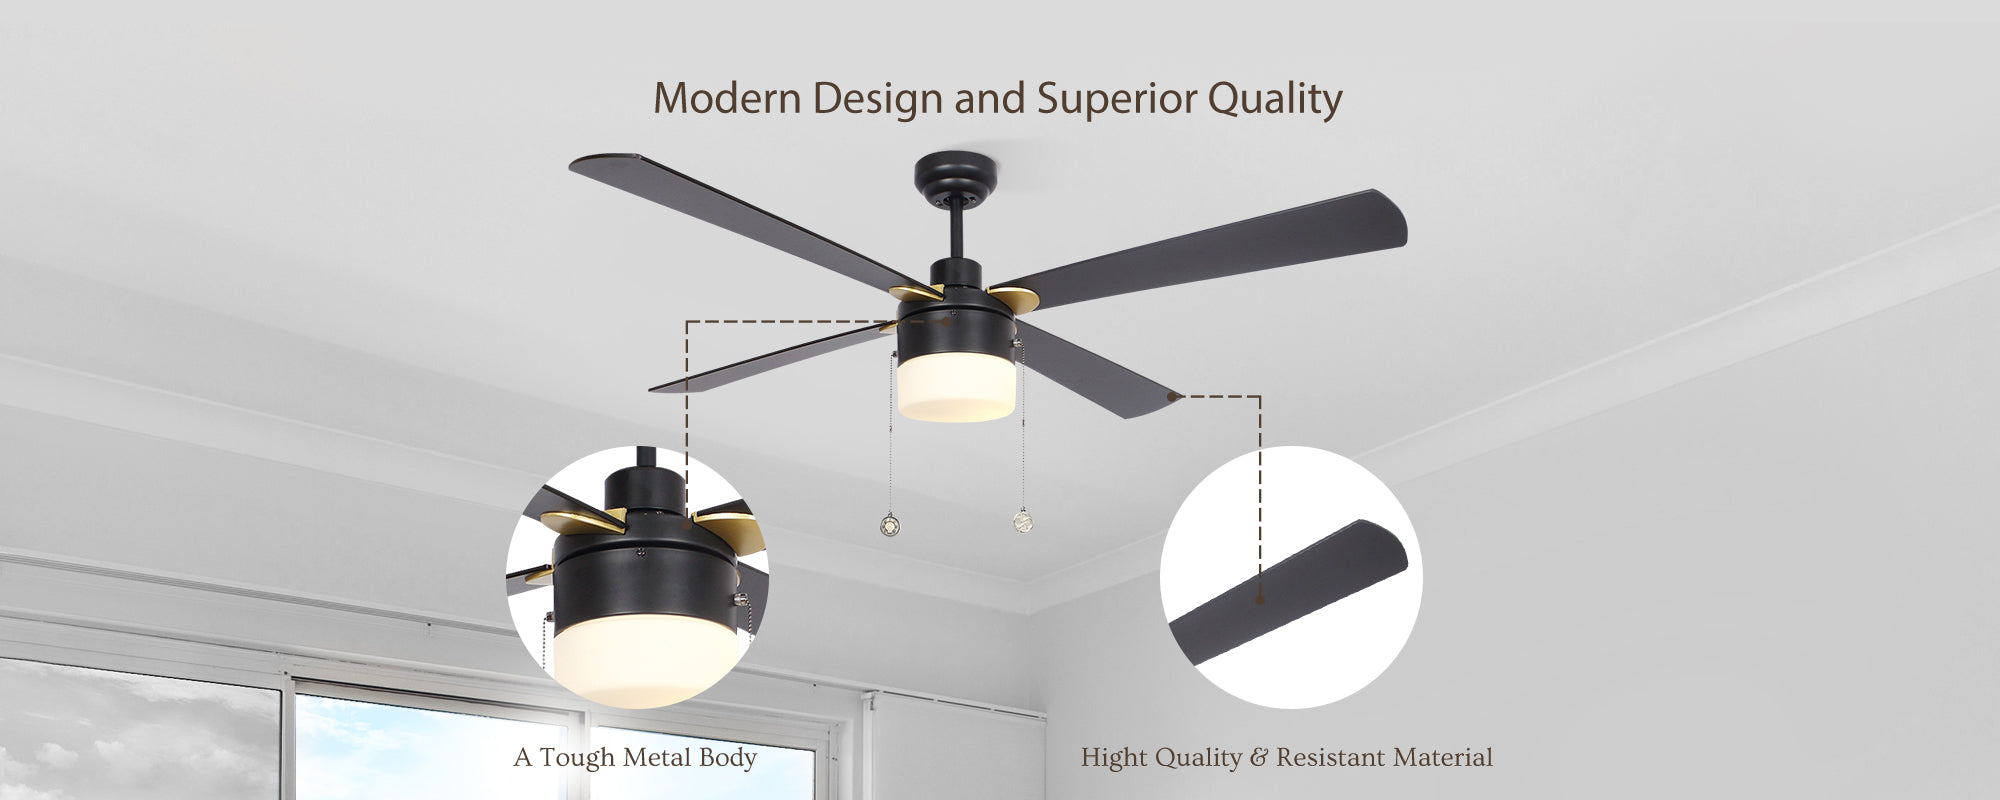 Carro-Smafan-Alrich-52-Ceiling-Fan-with-pull-chain-Light-Kit-Finest-Material-Superior-Design